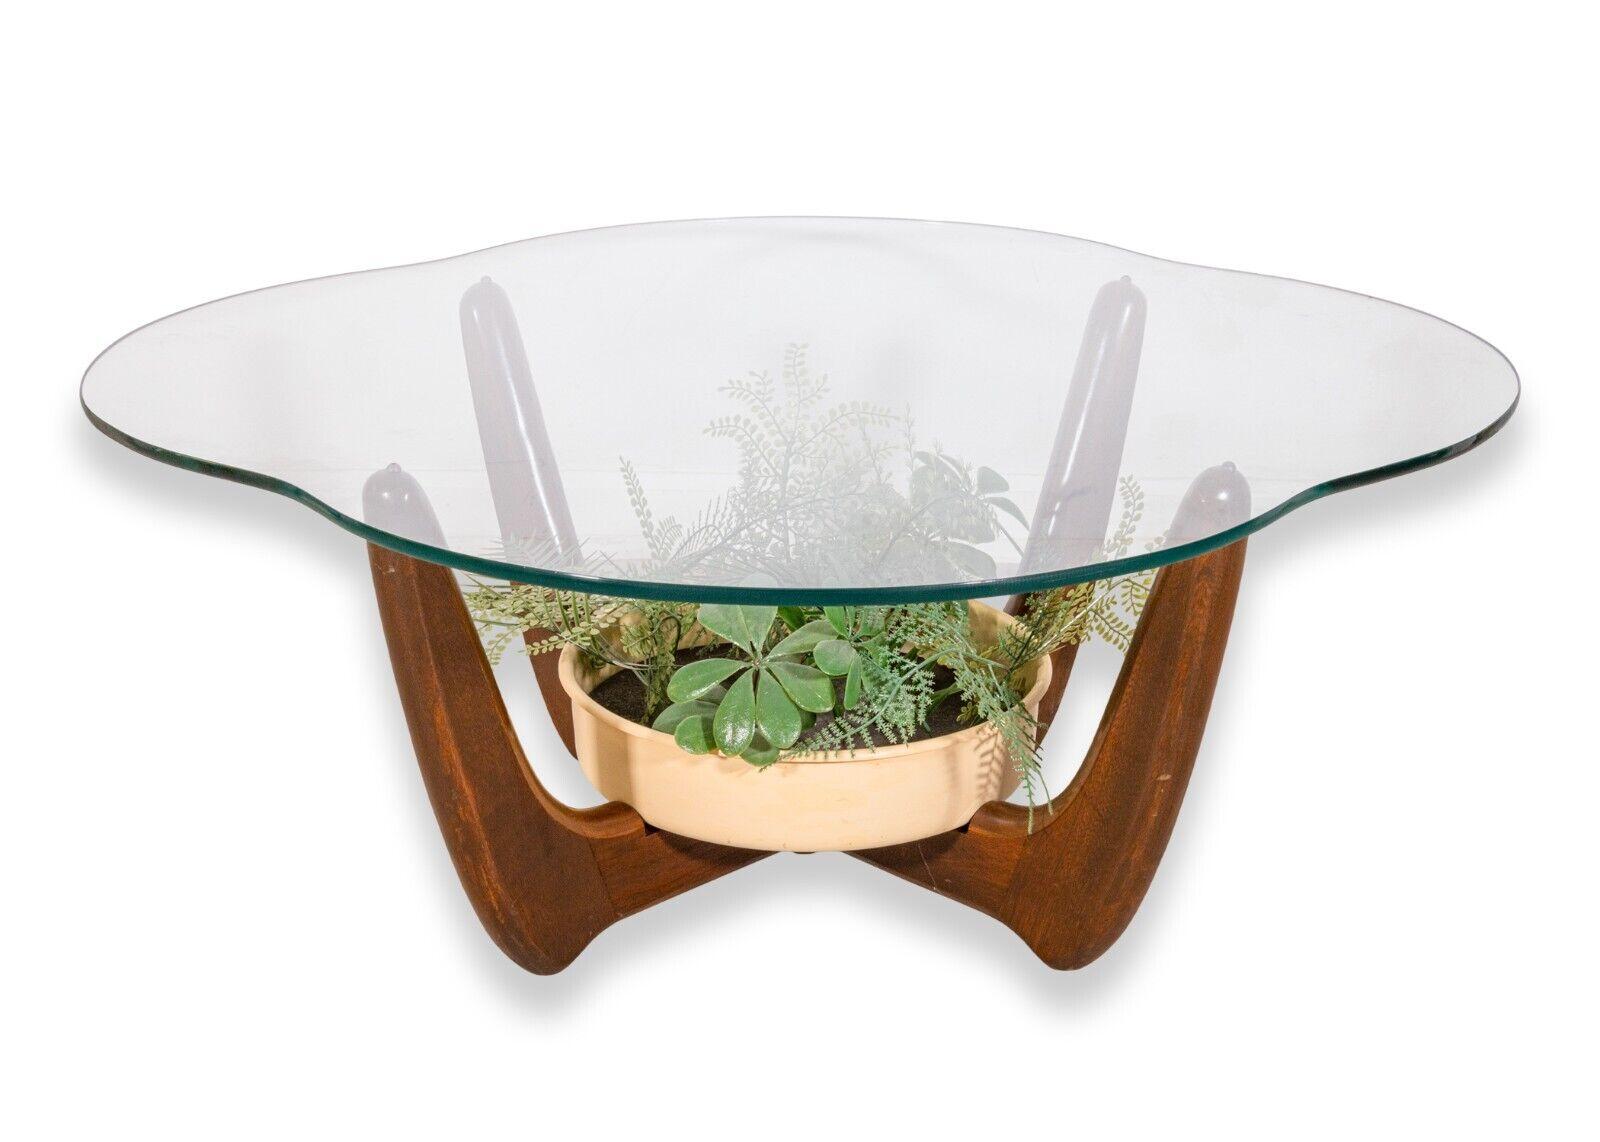 A mid century modern pair of Pearsall style sculptural base side and coffee tables with planters. This is a gorgeous set of complimentary tables. Both tables feature a full walnut construction, glass table tops, and round plastic planters. The